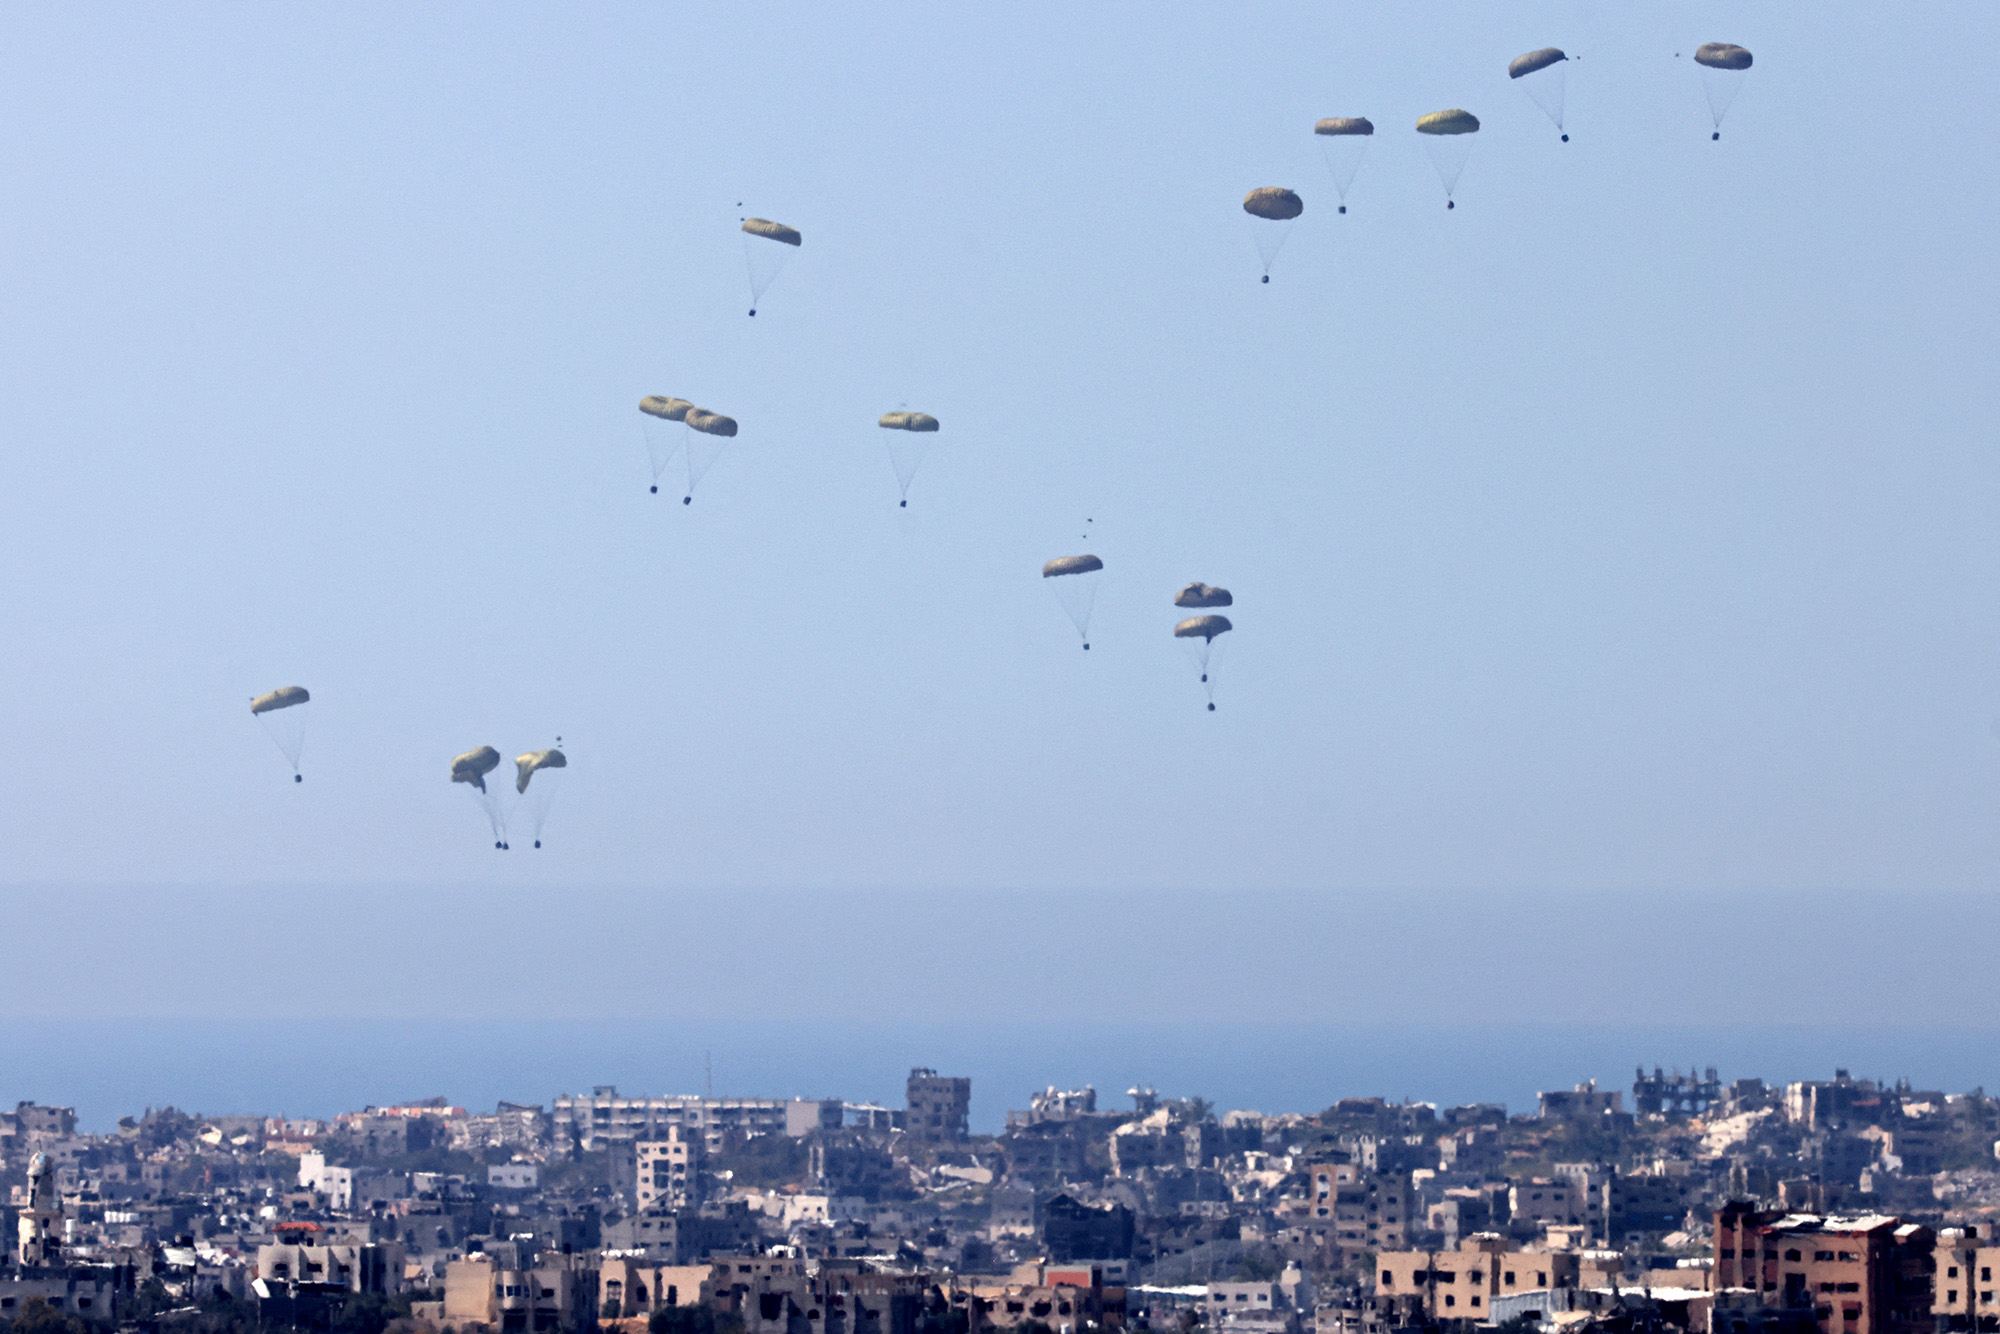 Humanitarian aid is airdropped over Gaza on March 12.